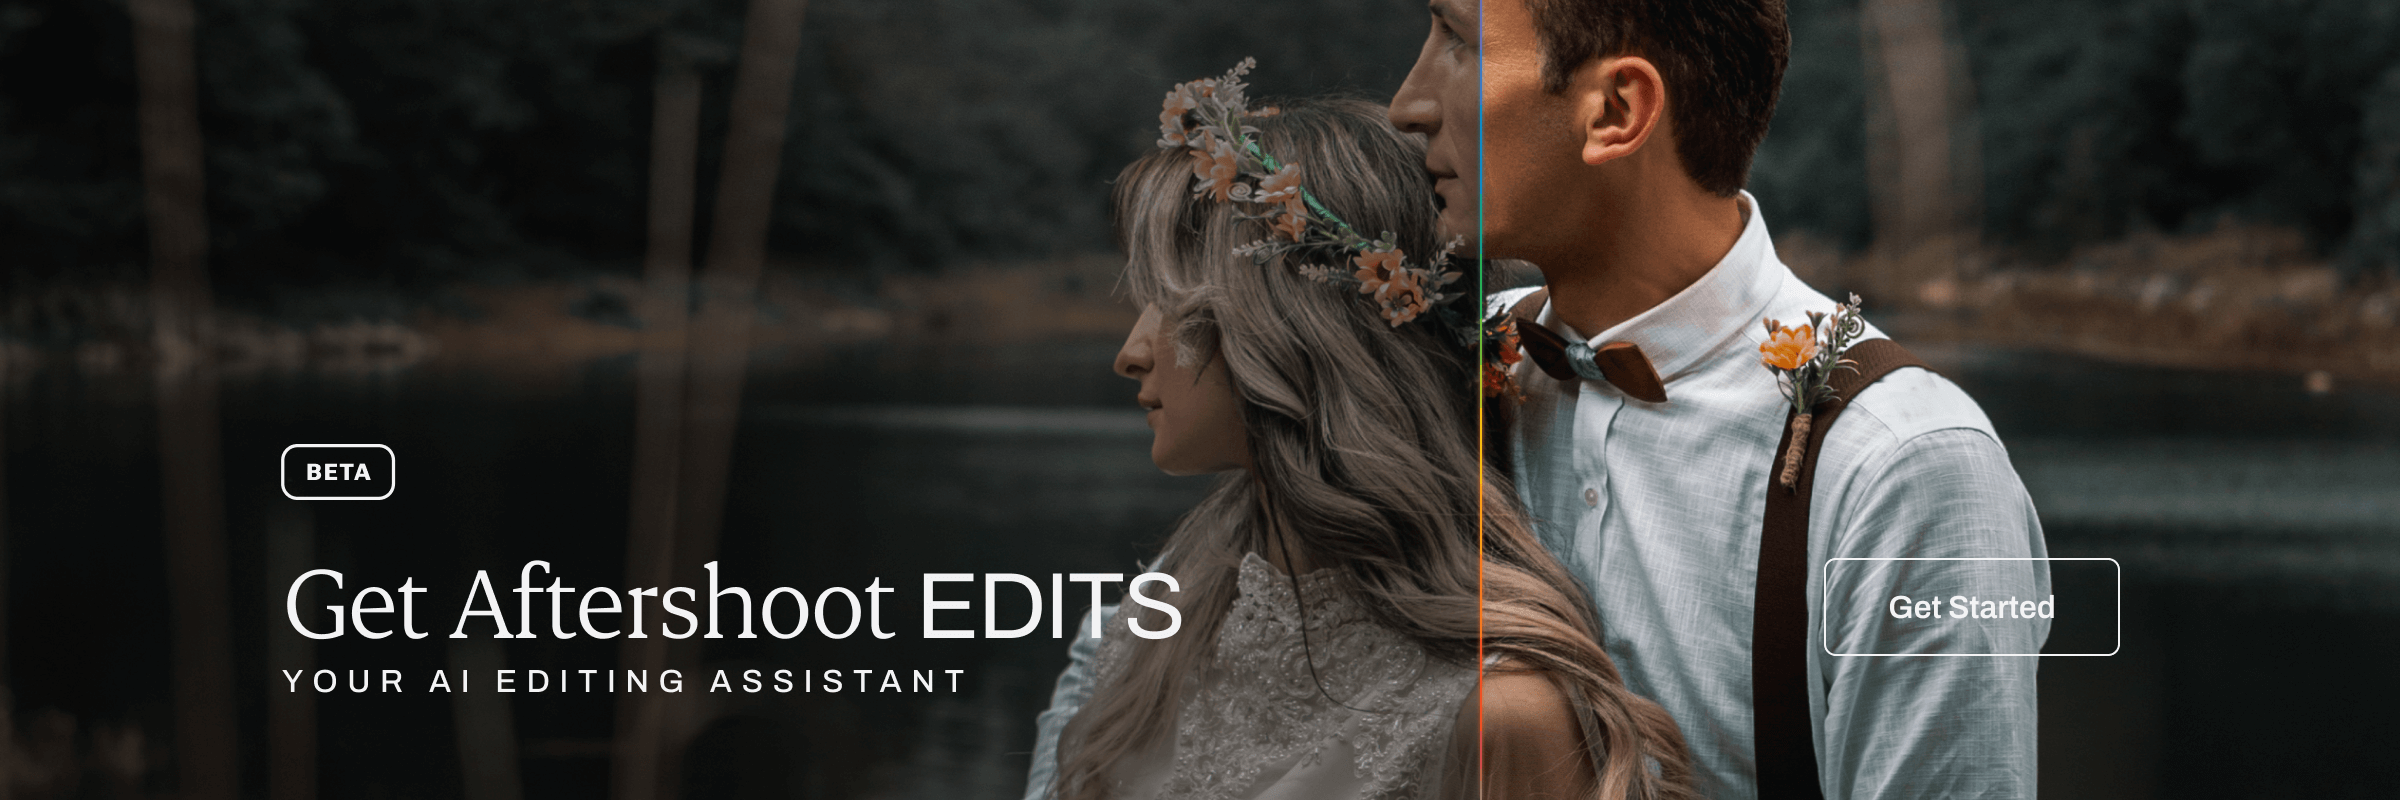 Try Aftershoot EDITS free for 30 days